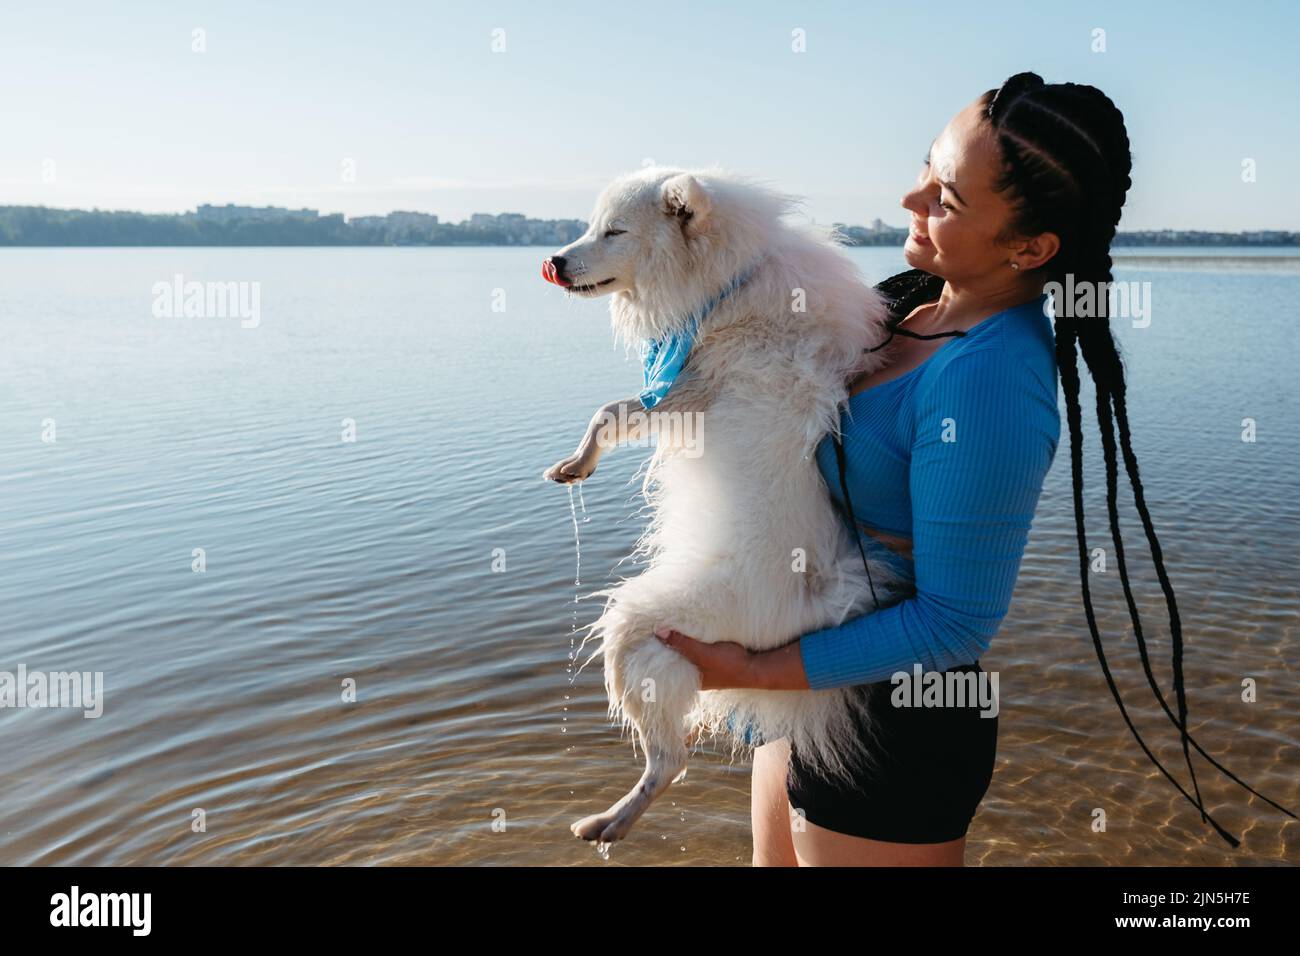 Happy Woman with Dreadlocks Holding on Hands Her Snow-White Dog Japanese Spitz on the Lake at Sunrise Stock Photo